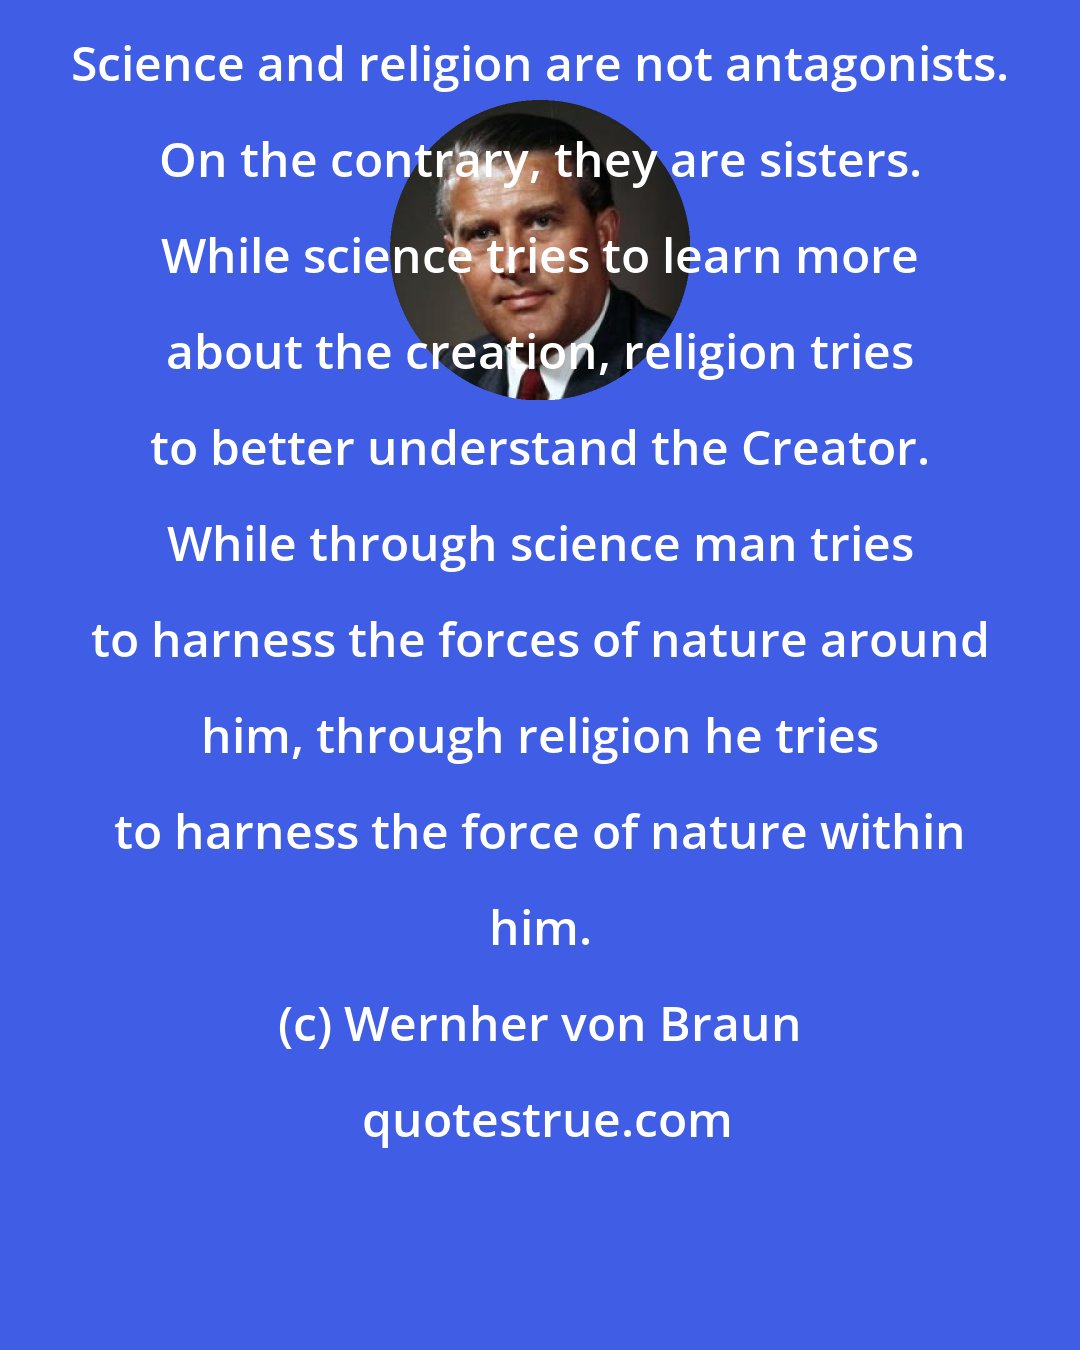 Wernher von Braun: Science and religion are not antagonists. On the contrary, they are sisters. While science tries to learn more about the creation, religion tries to better understand the Creator. While through science man tries to harness the forces of nature around him, through religion he tries to harness the force of nature within him.